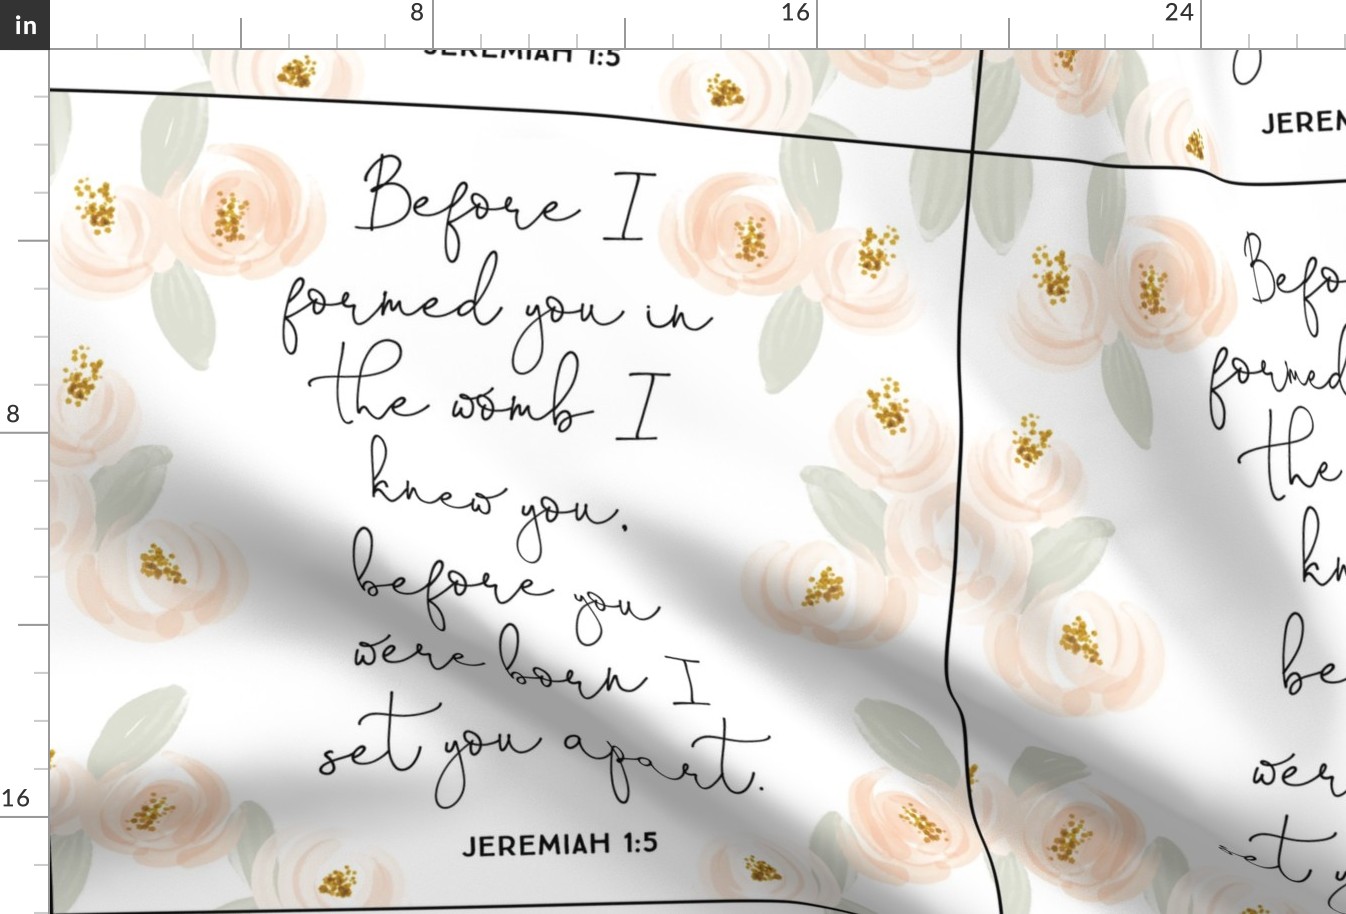 6 loveys: soft peach floral before I formed you in the womb I knew you, before you were born I set you apart. Jeremiah 1:5